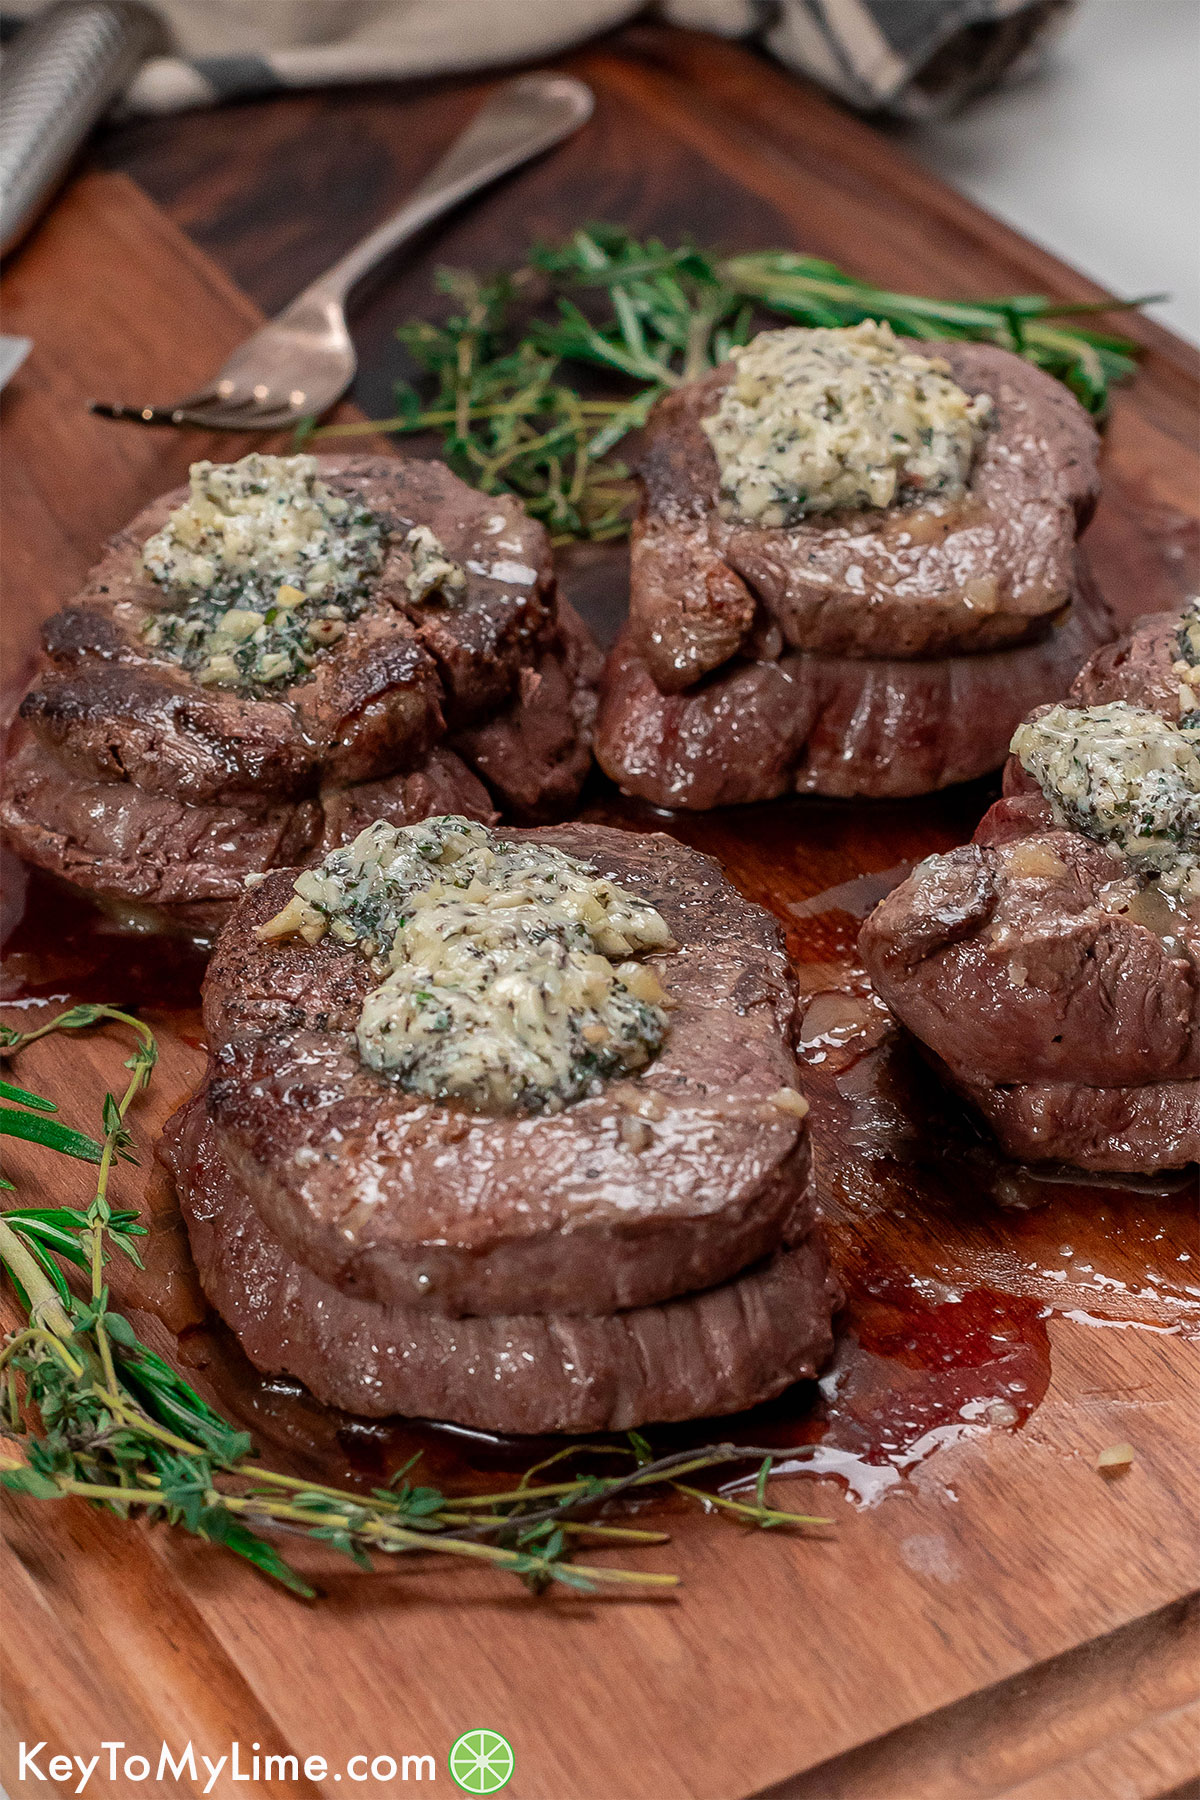 A side image of multiple filet mignons with herbs to the side resting on a cutting board.